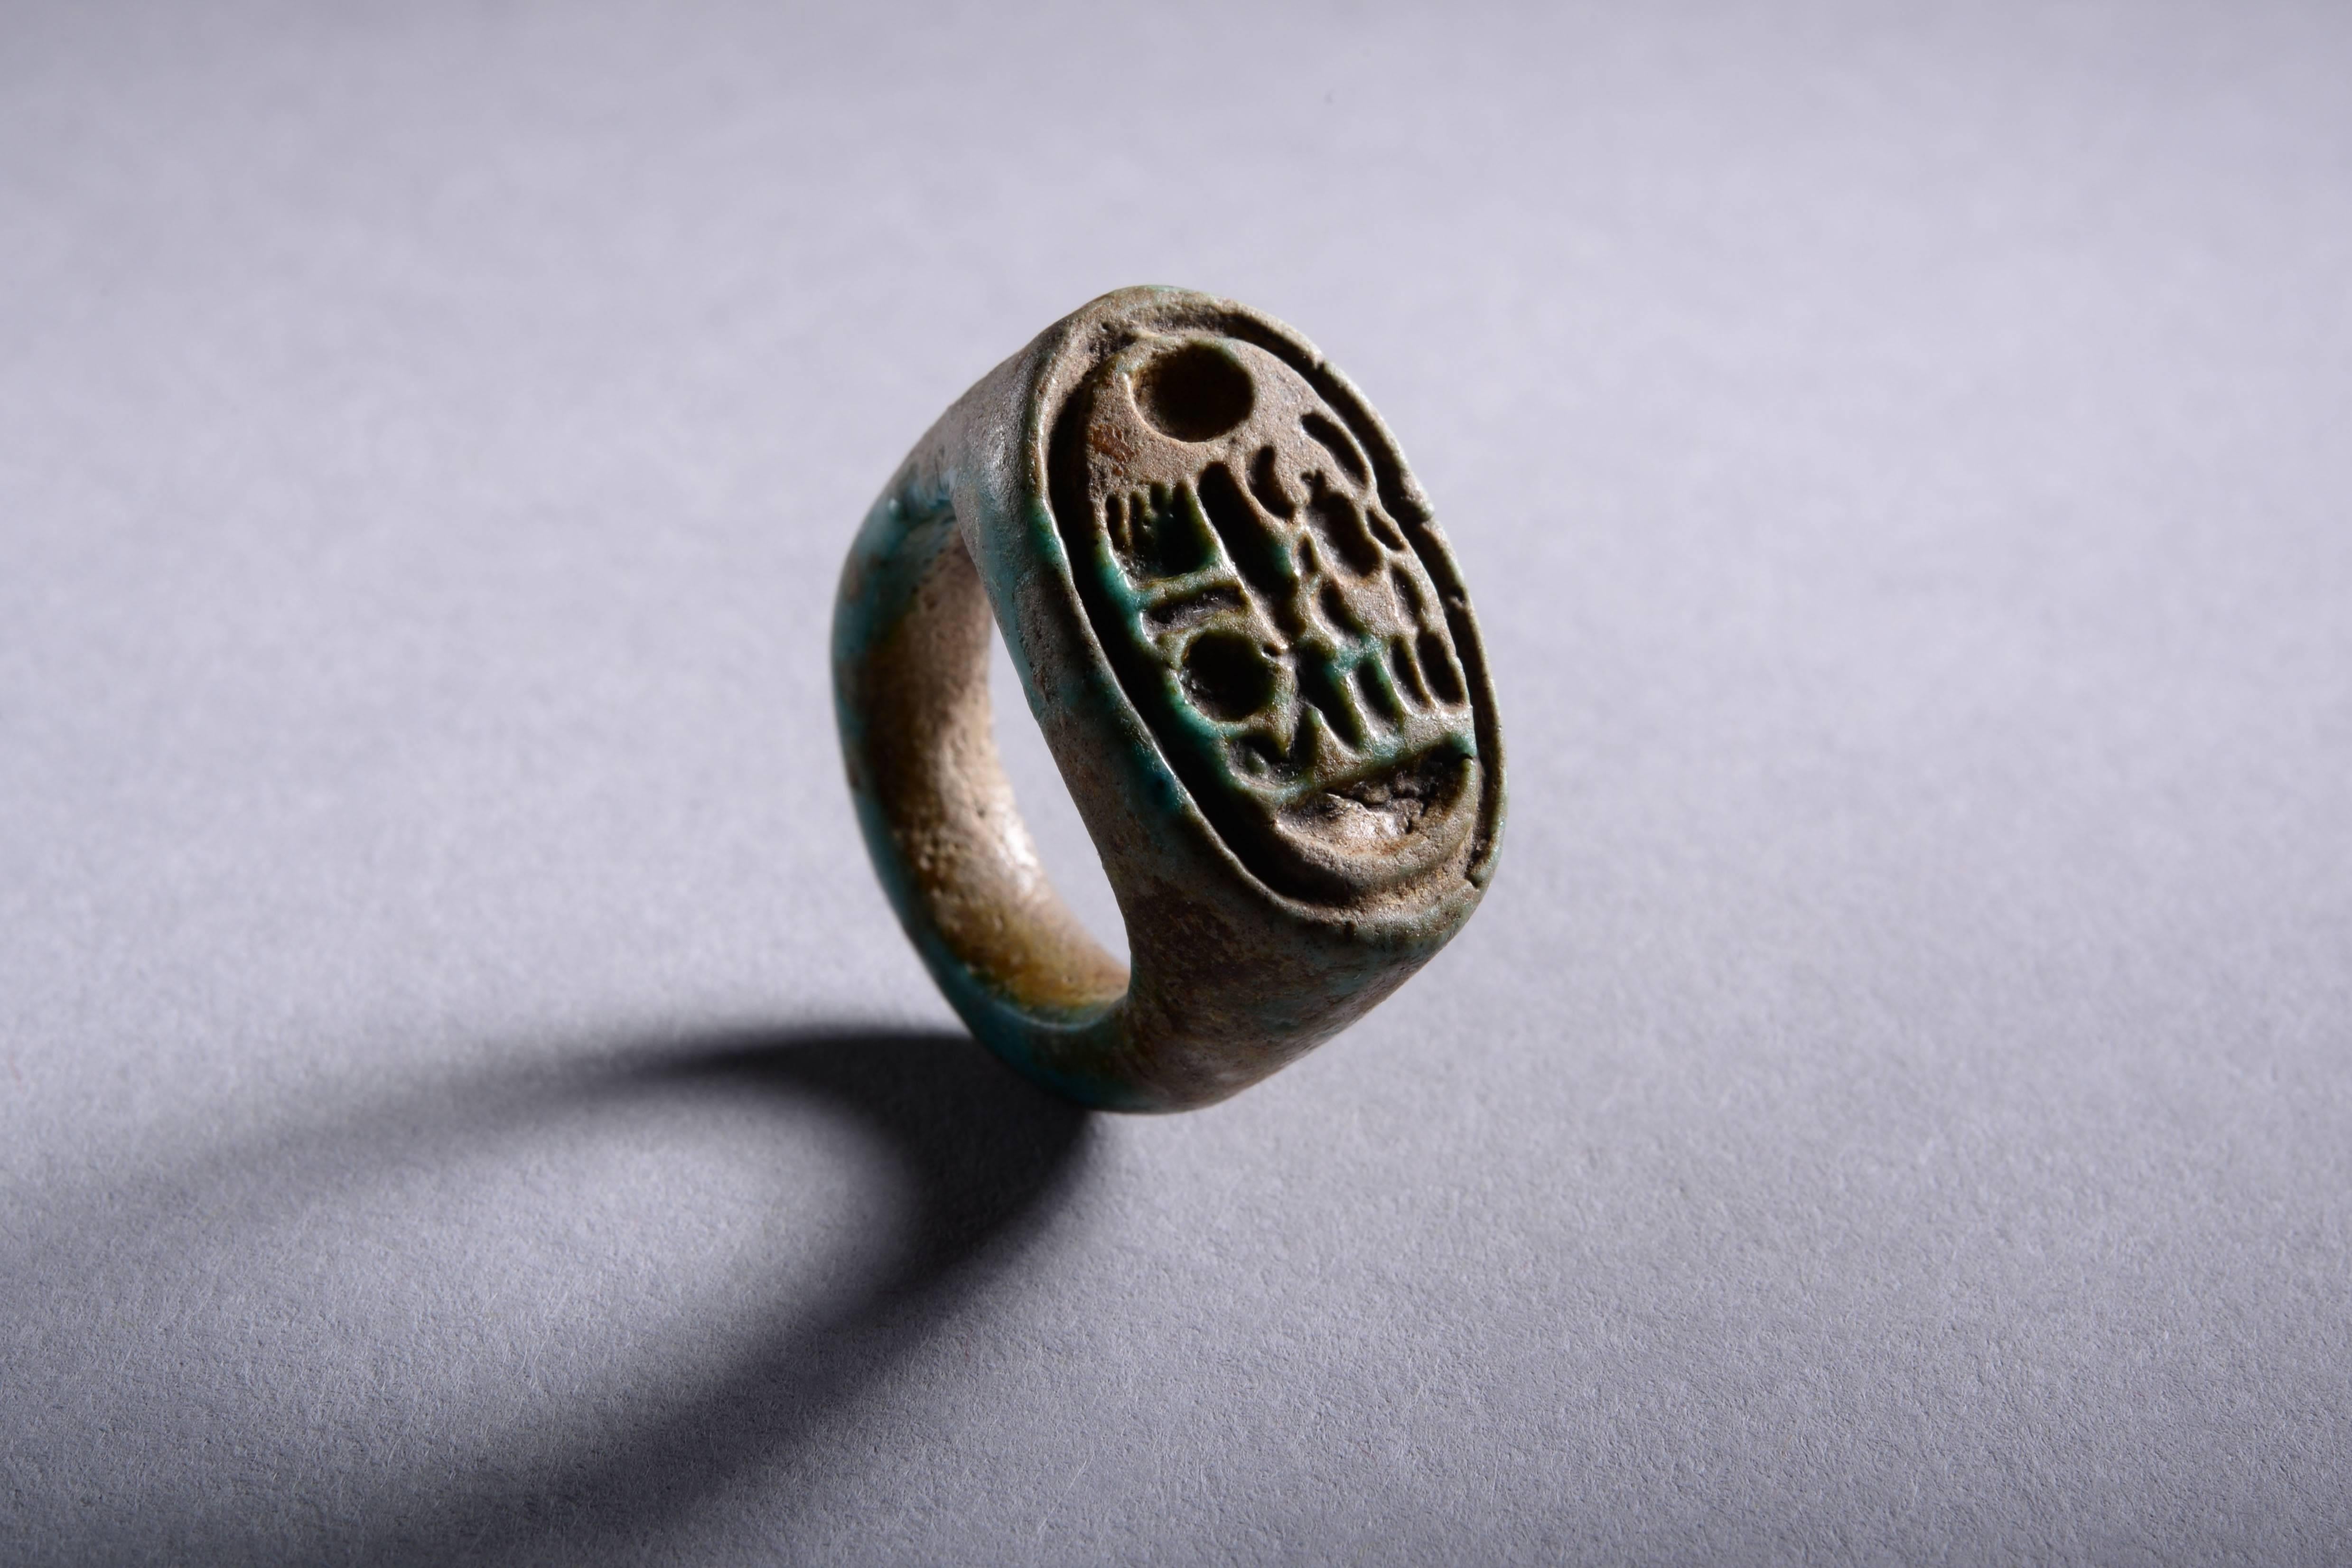 An ancient Egyptian faience ring, inscribed with the cartouche of Tutankhamun. Dating to the New Kingdom, XVIII Dynasty, 1332-1323 BC.

Tutankhamun’s name was made famous by Howard Carter, when he discovered the king’s miraculously intact tomb in